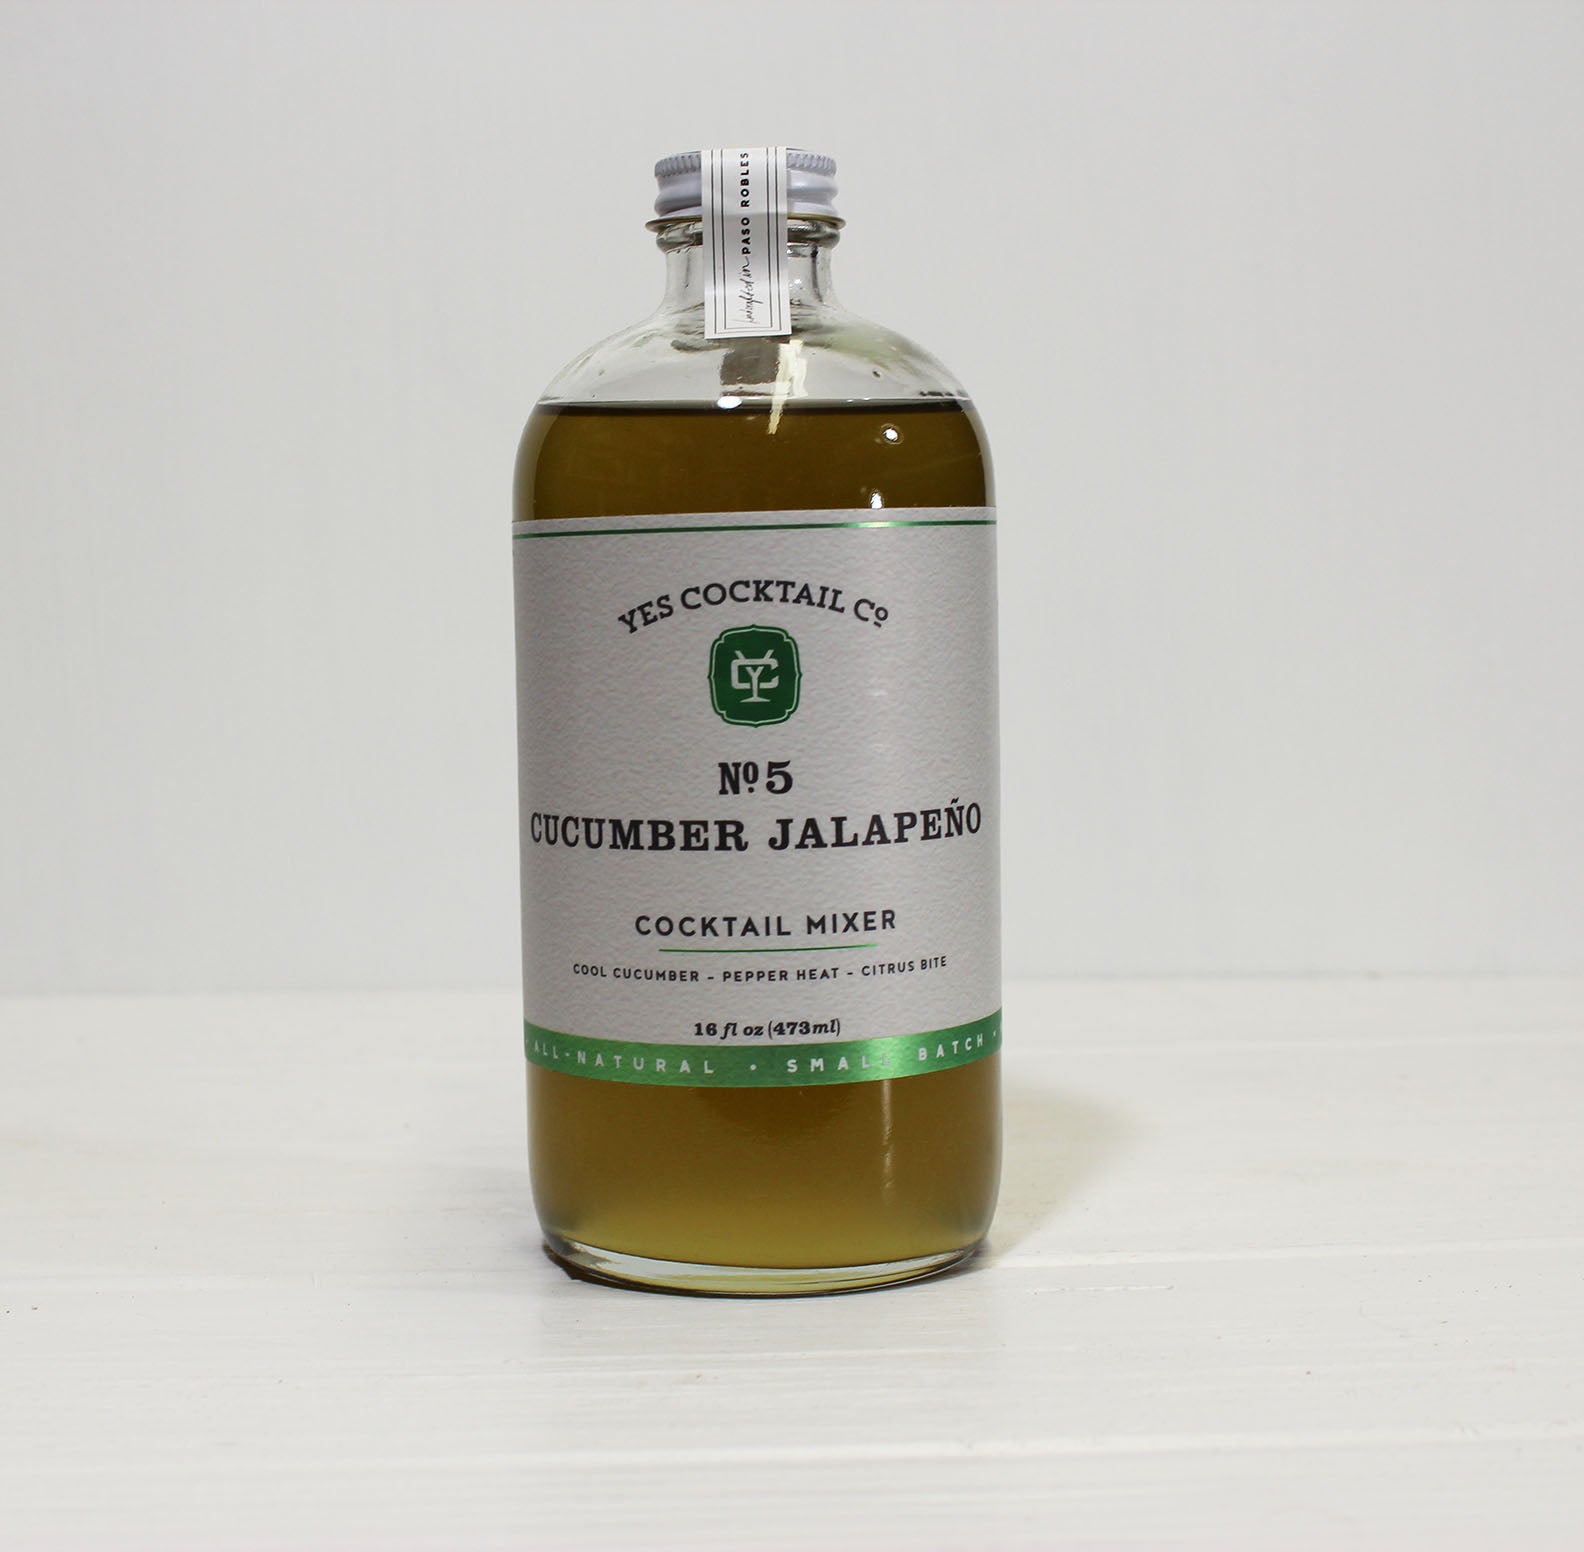 Cucumber Jalapeño mixer by Yes Cocktails Co